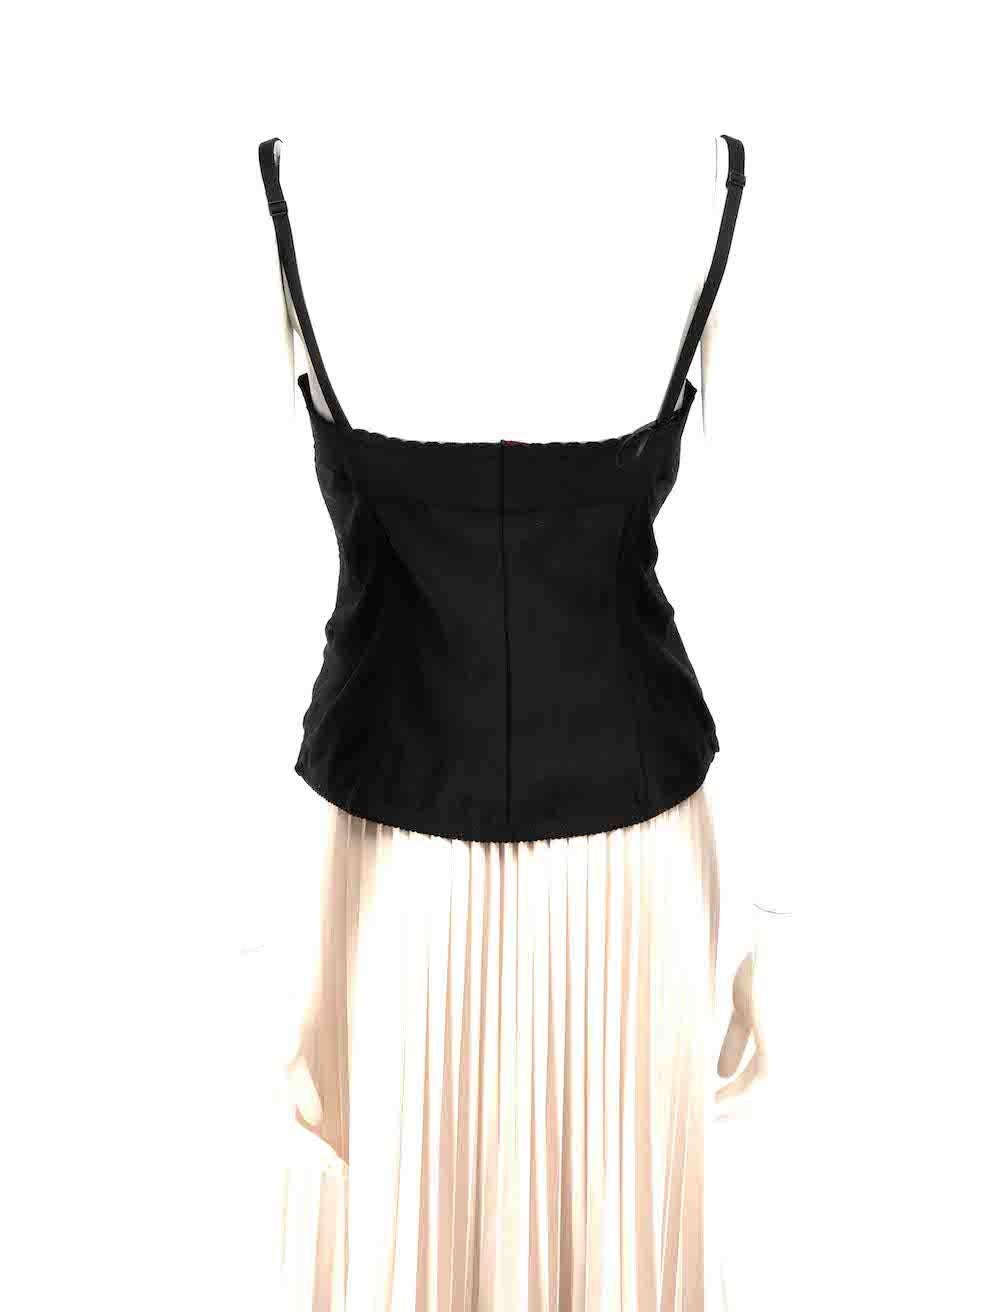 Dolce & Gabbana Vintage Black Bustier Top Size M In Good Condition For Sale In London, GB